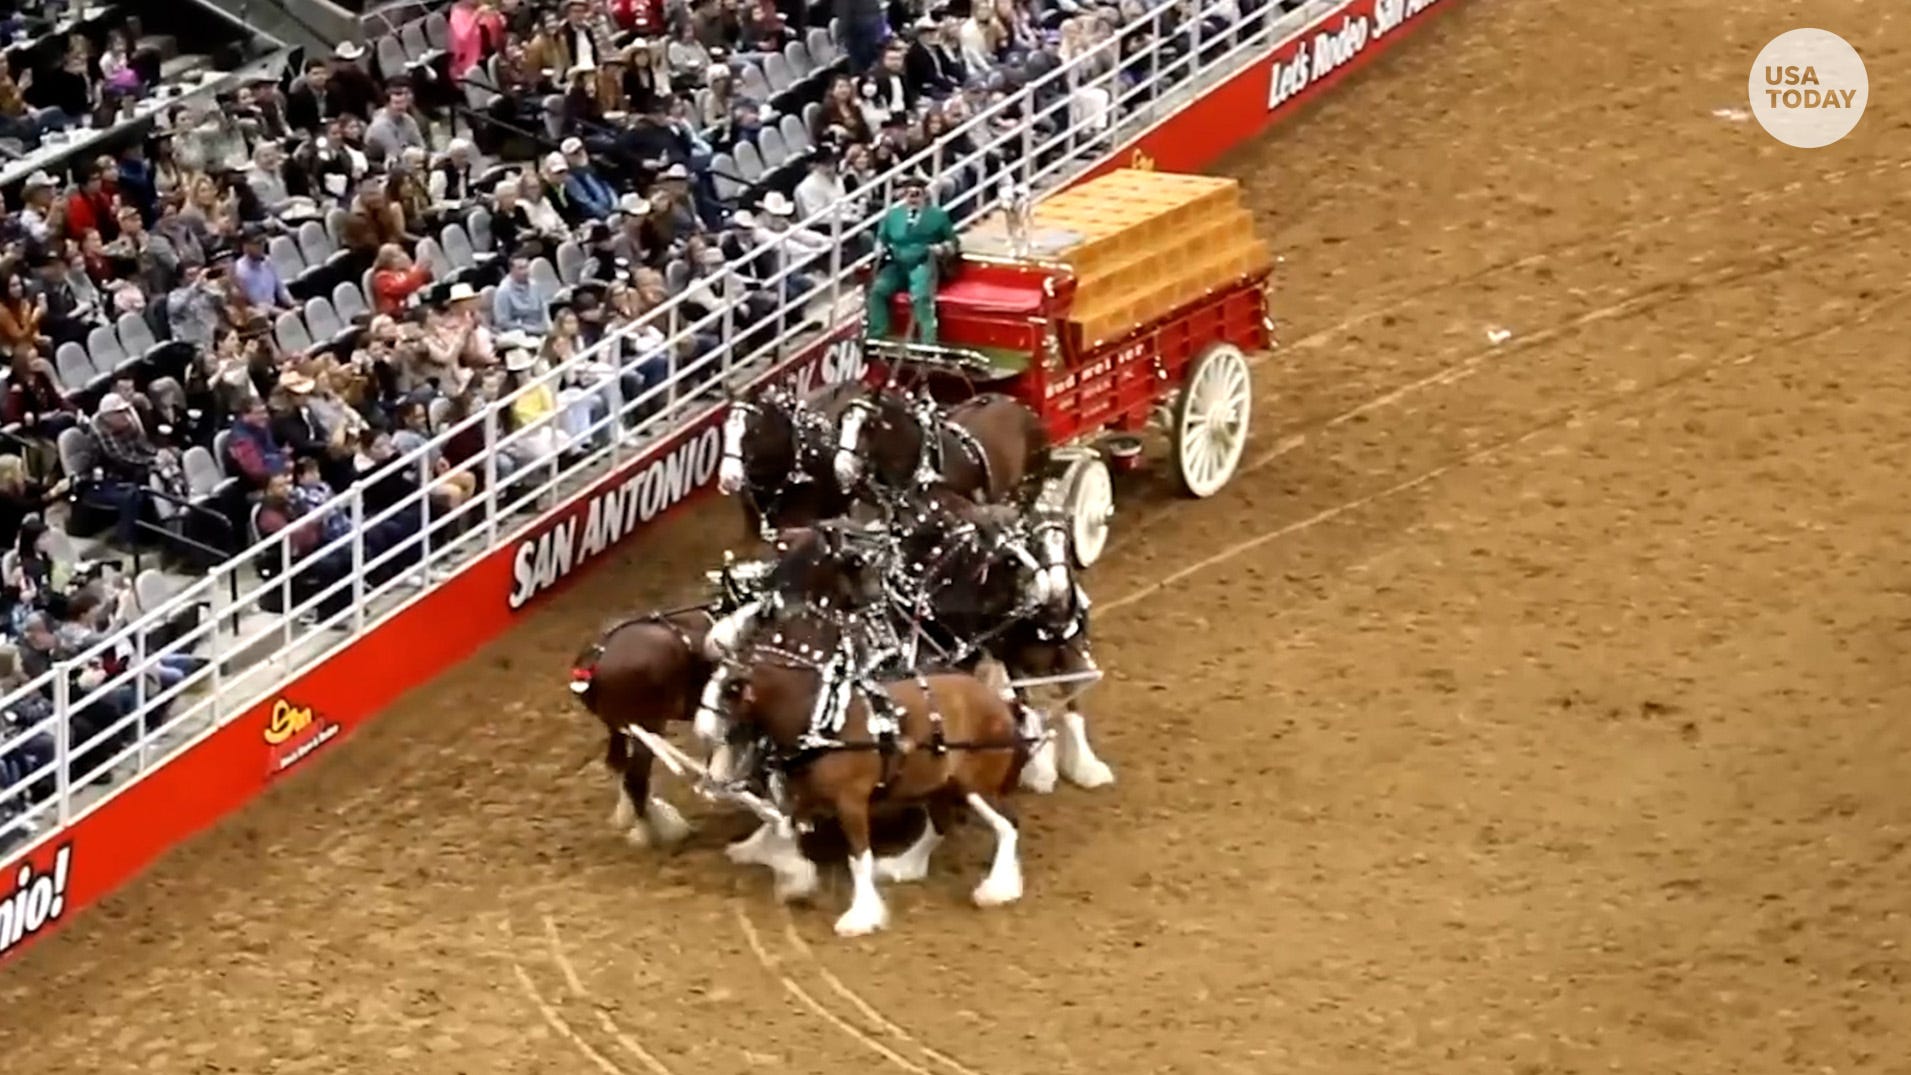 Video Budweiser Clydesdales get tangled up at San Antonio rodeo